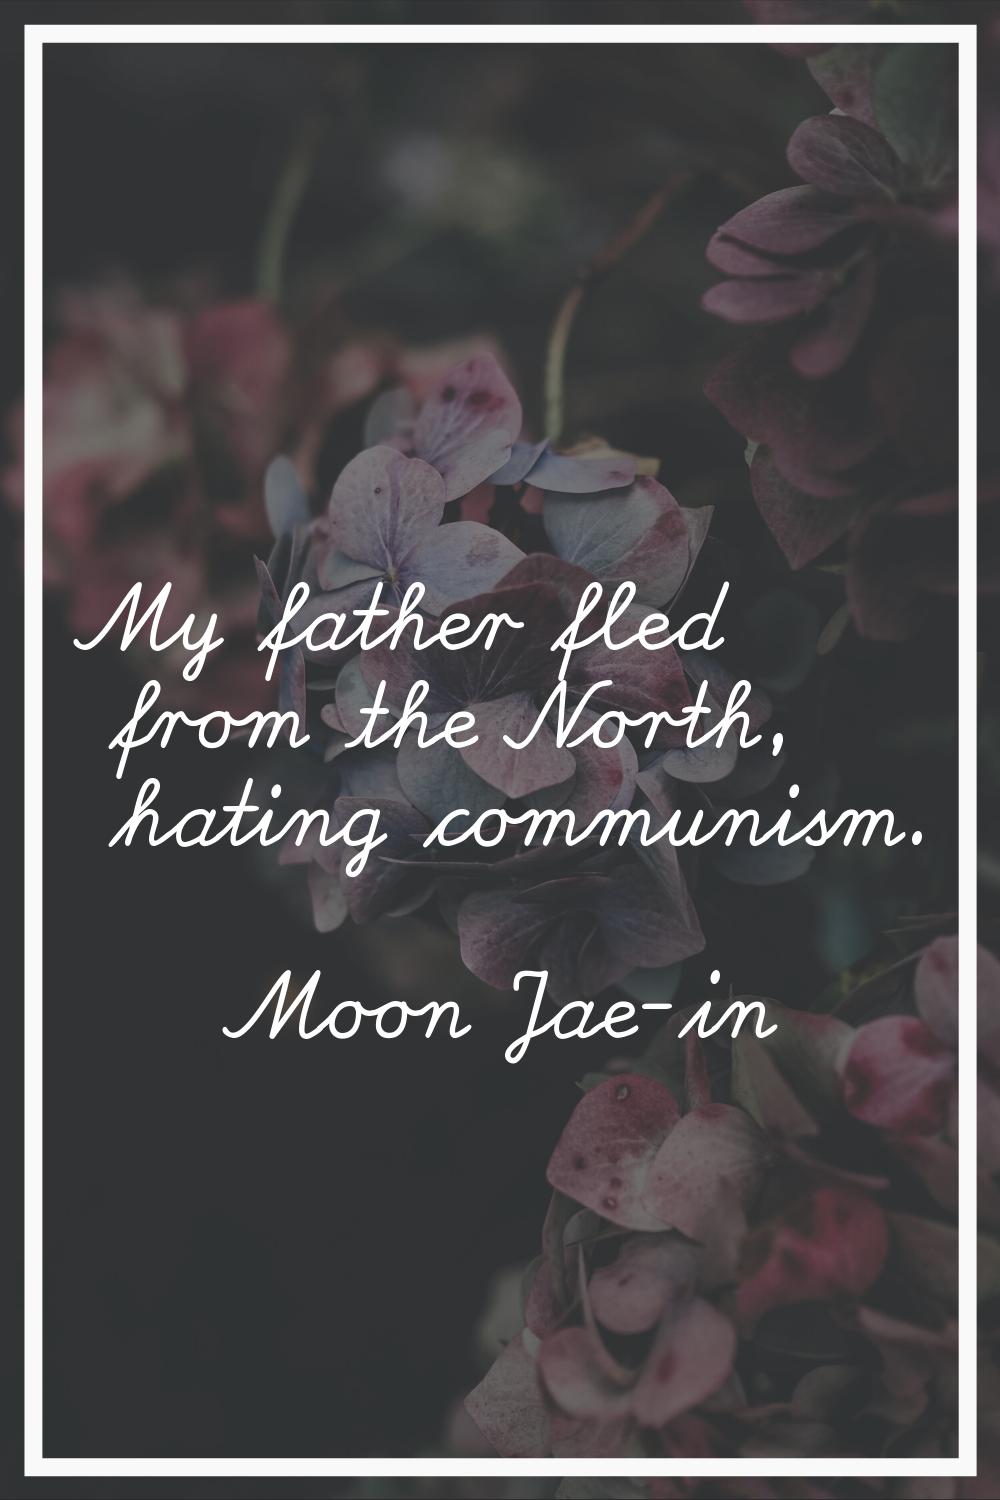 My father fled from the North, hating communism.